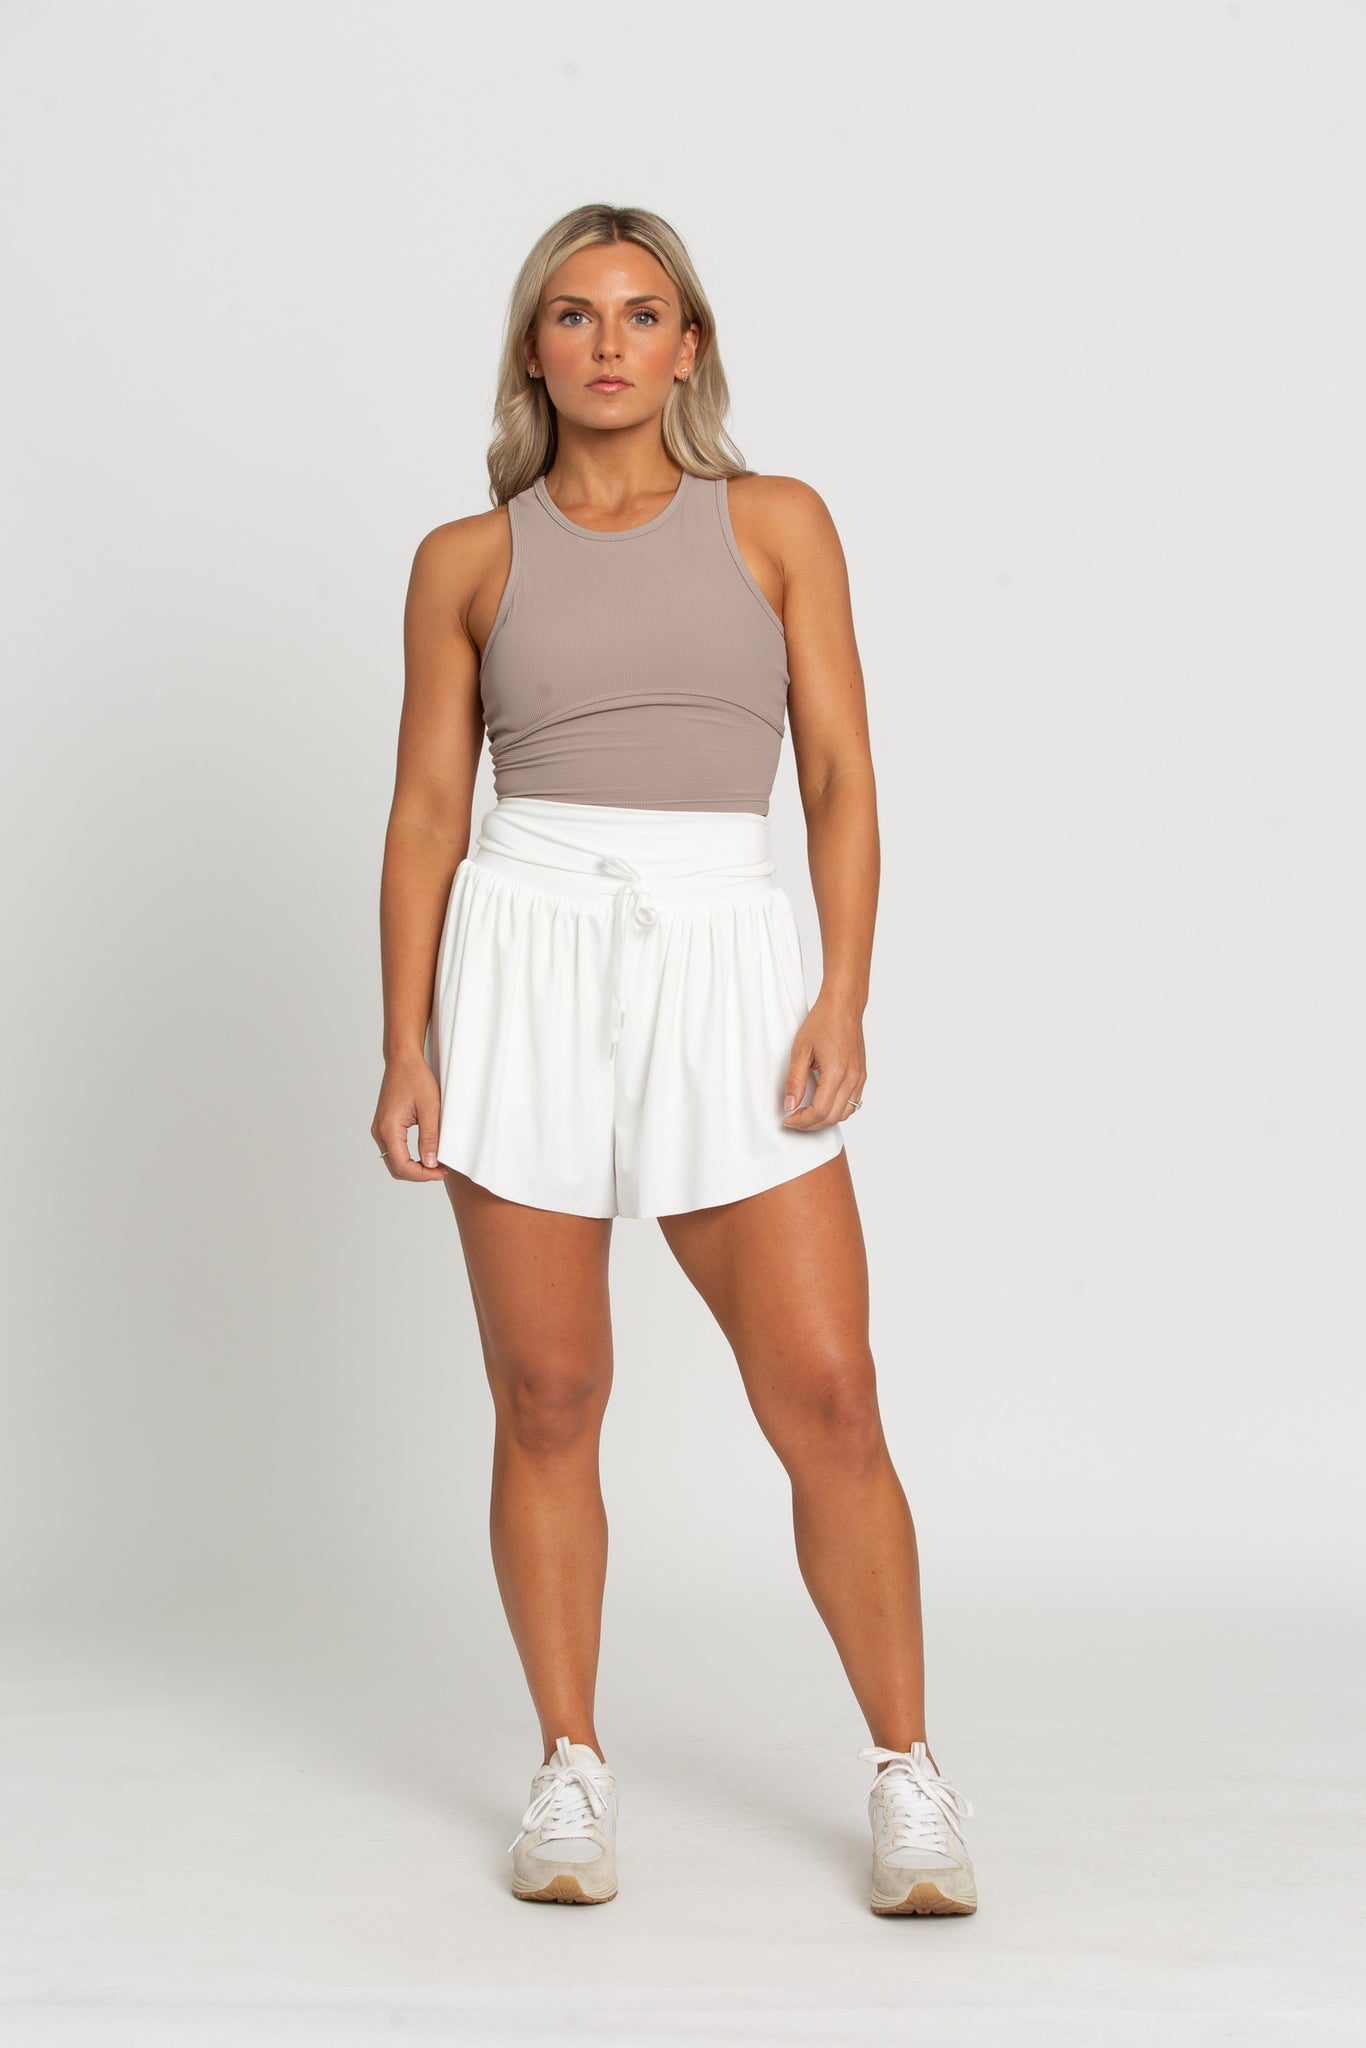 Taupe Ribbed Yoga Top